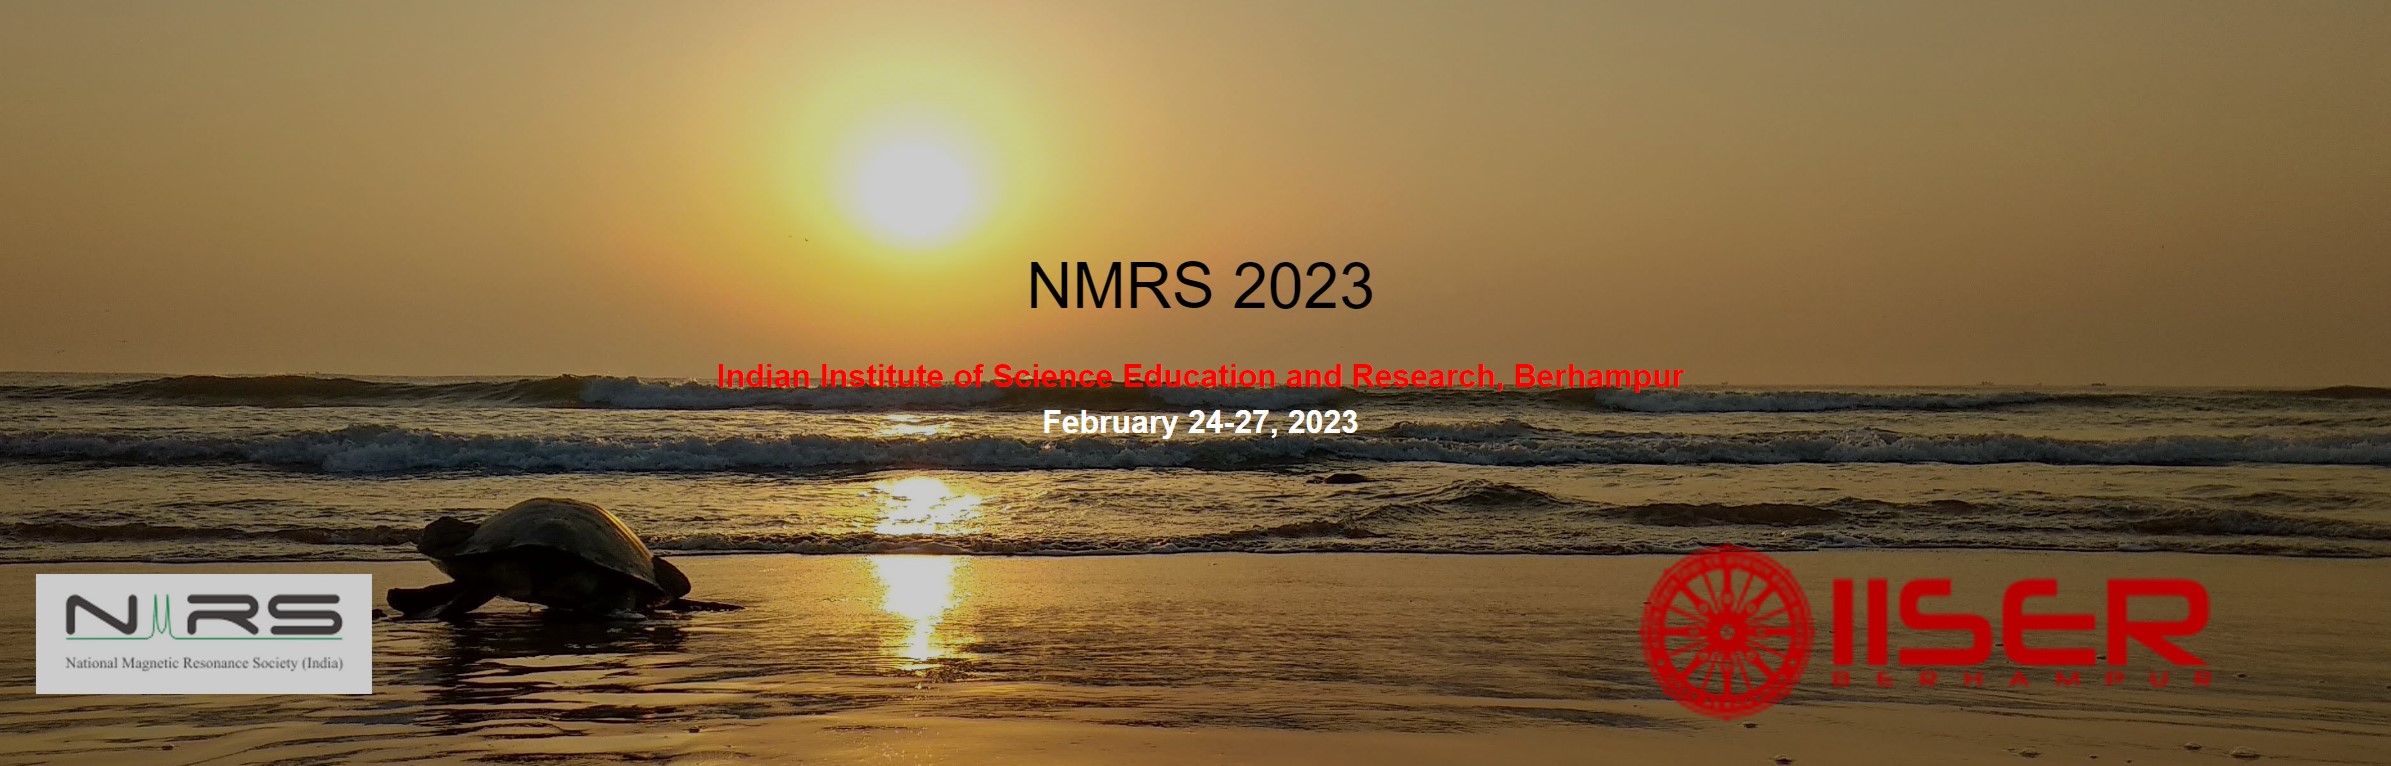 NMRS 2023 Indian Institute of Science Education and Research: Berhampur, India